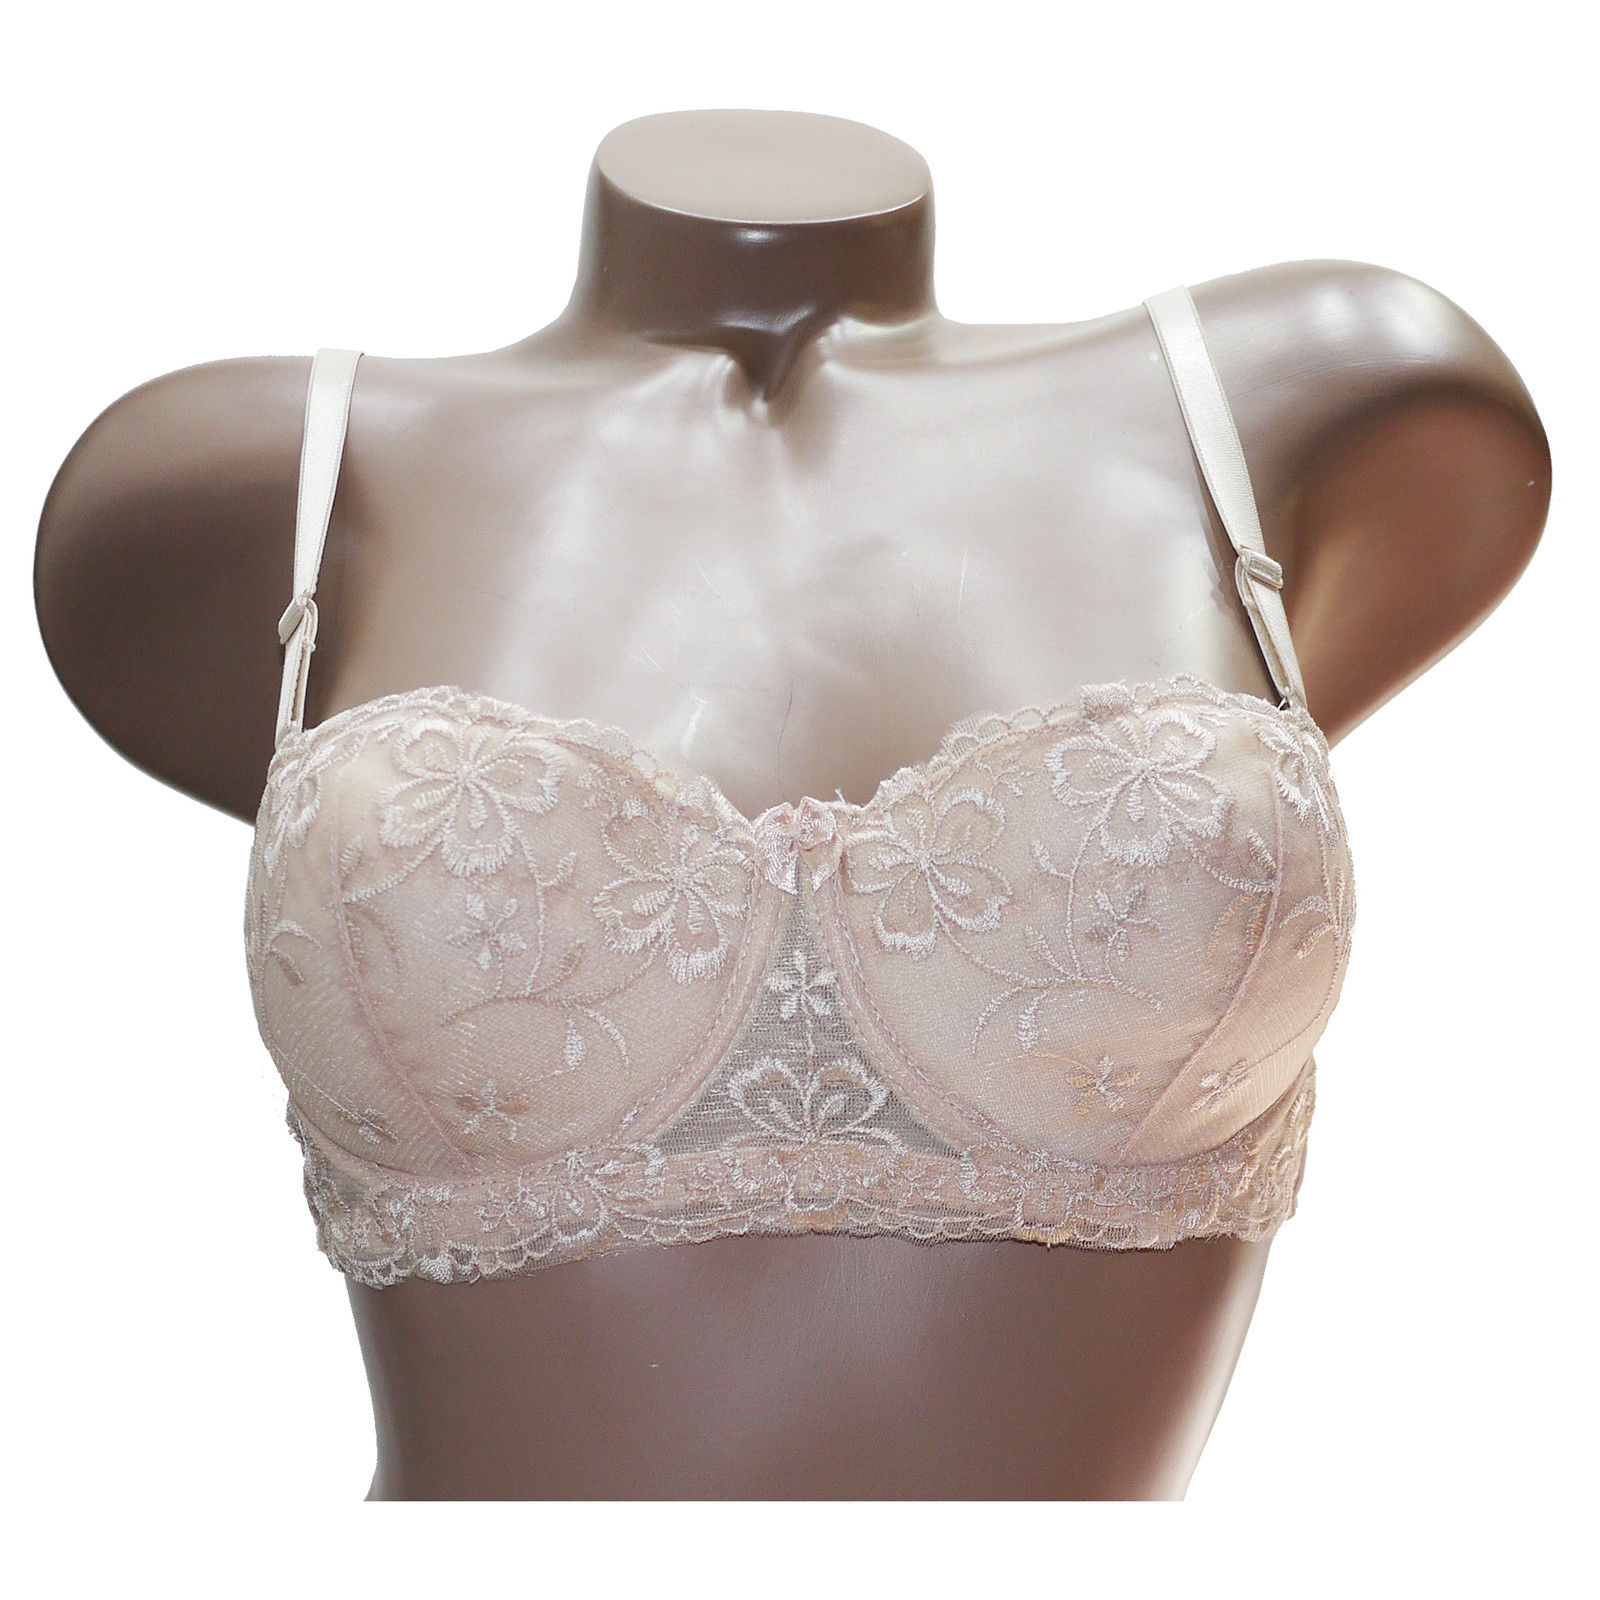 Trifolium Everyday Bra Wired Padded Embroidered Lacy Lace Balconette Beige 73323